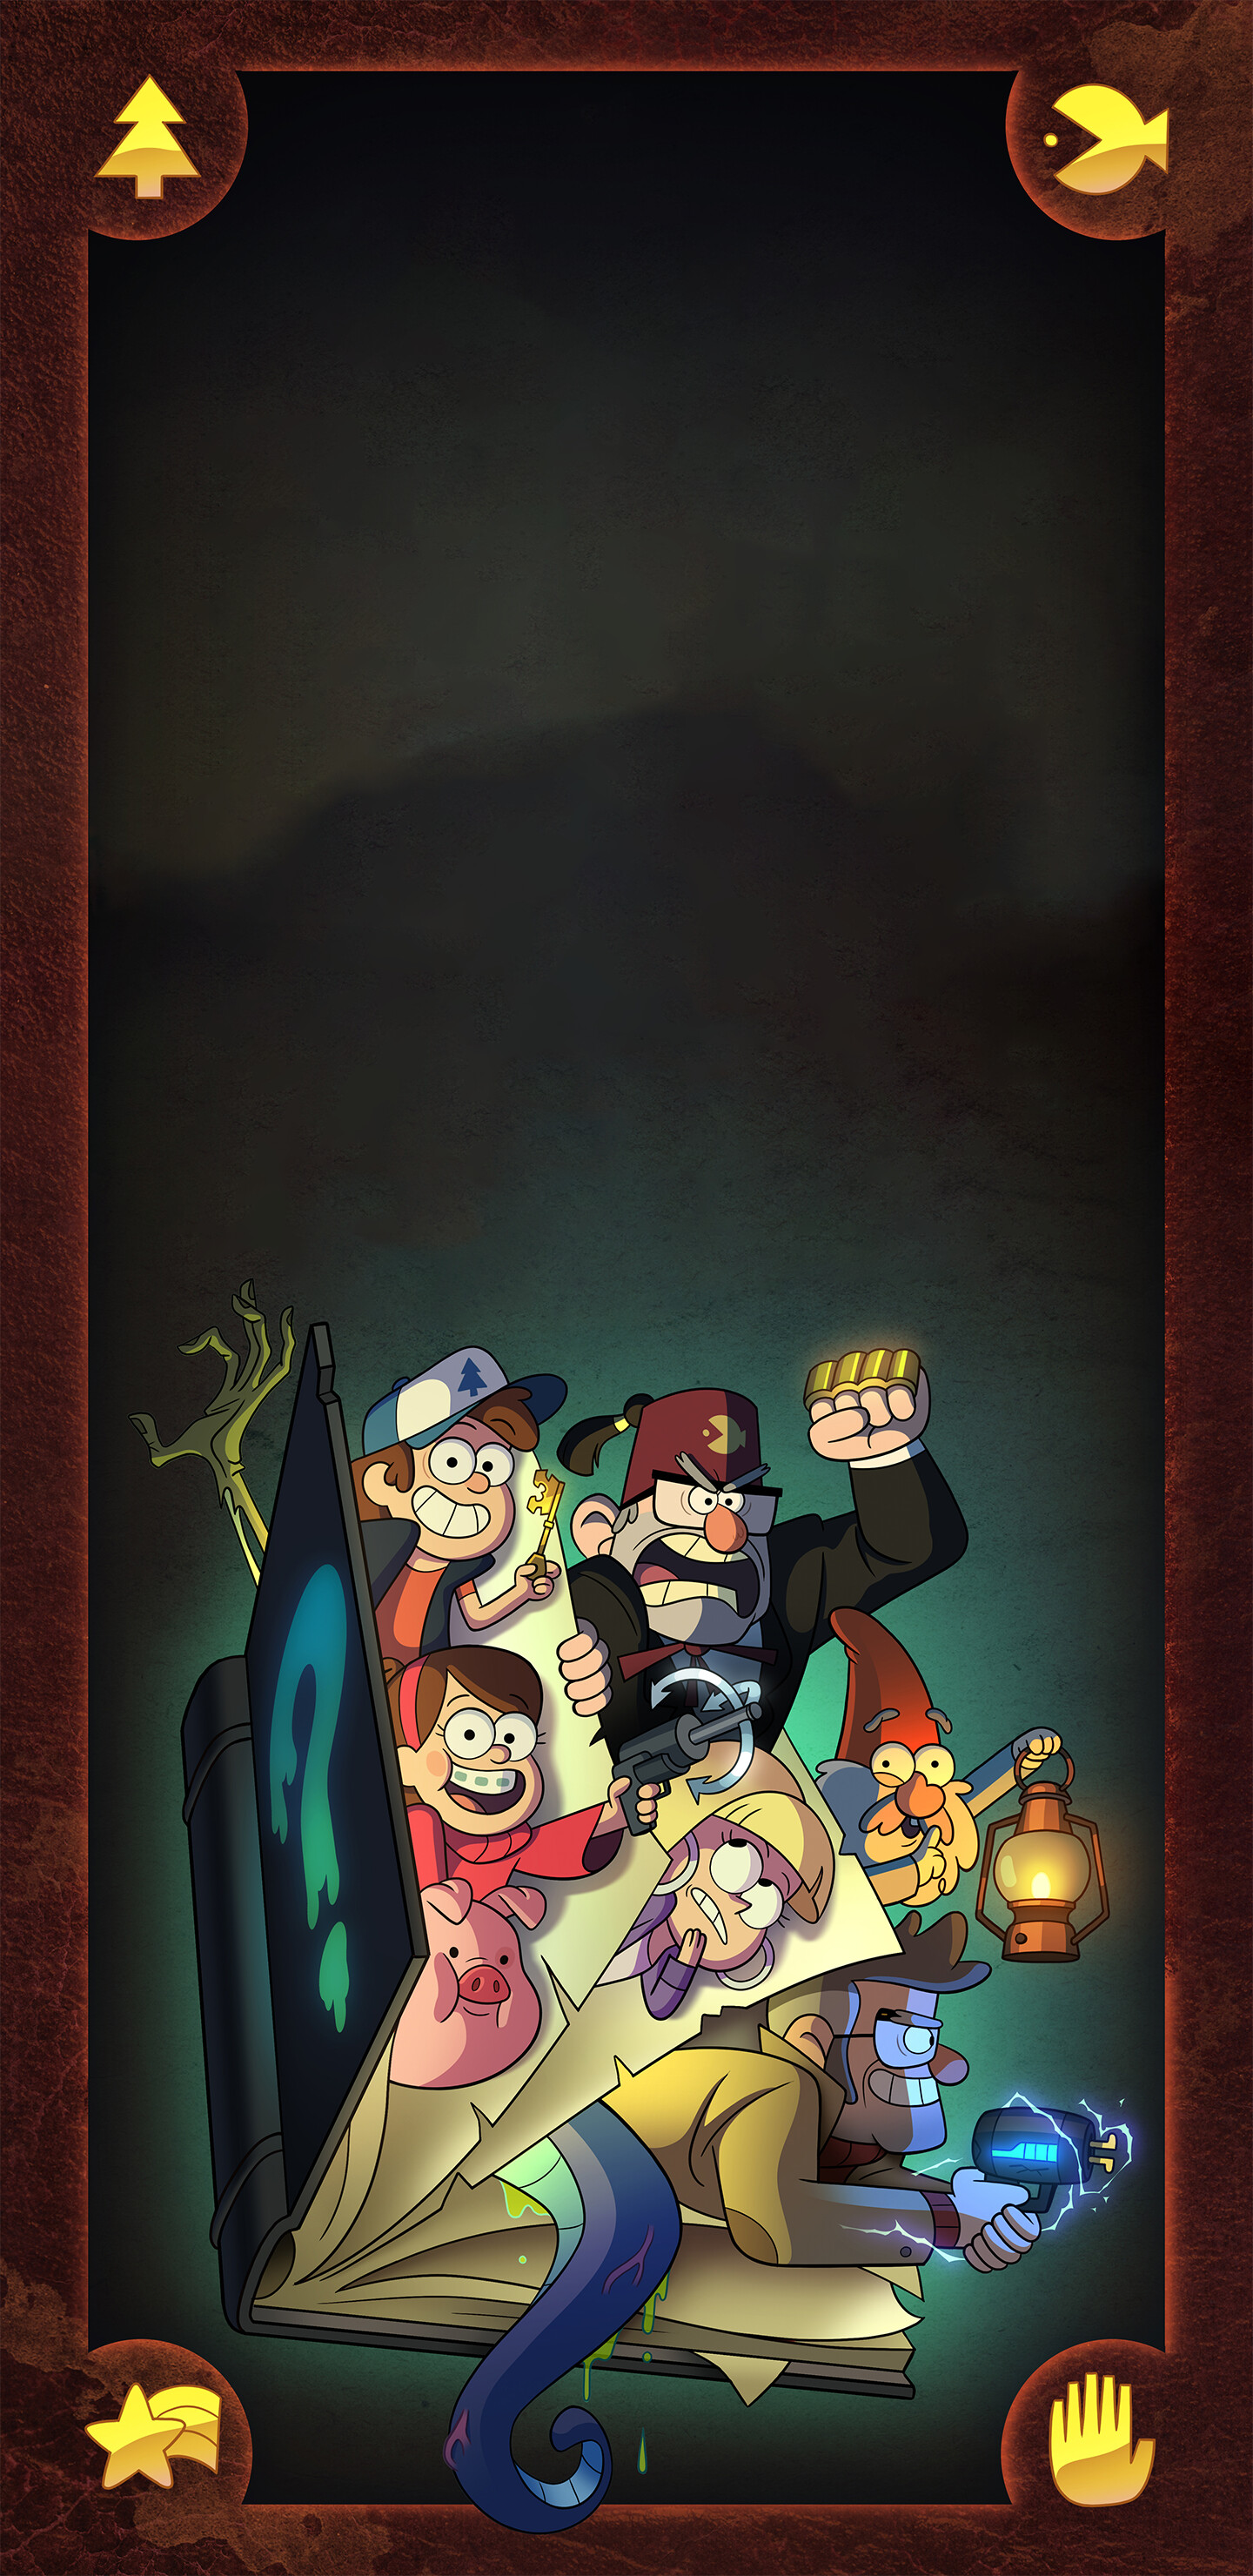 Gravity Falls: Dipper and Mabel sent to spend the summer with their great-uncle Stan. 1440x2960 HD Wallpaper.